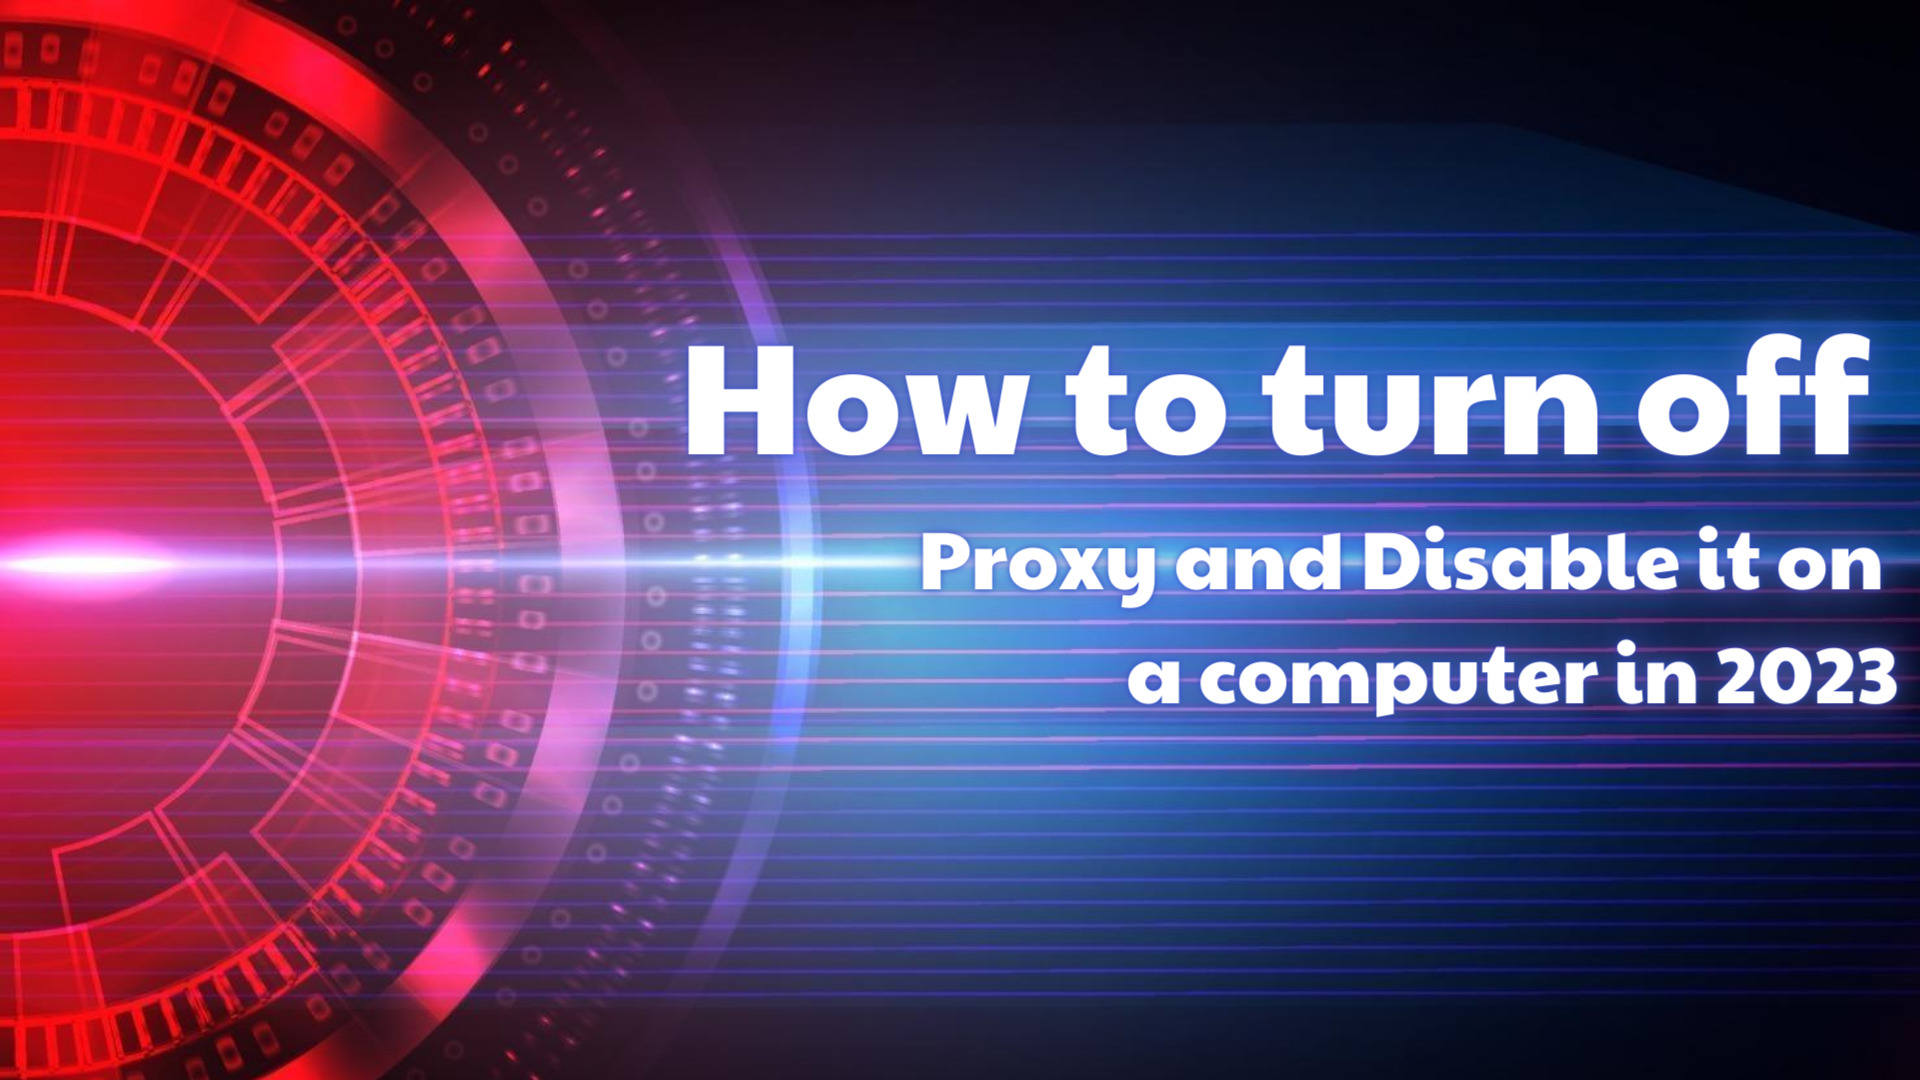 How to turn off Proxy and Disable it on a computer in 2023